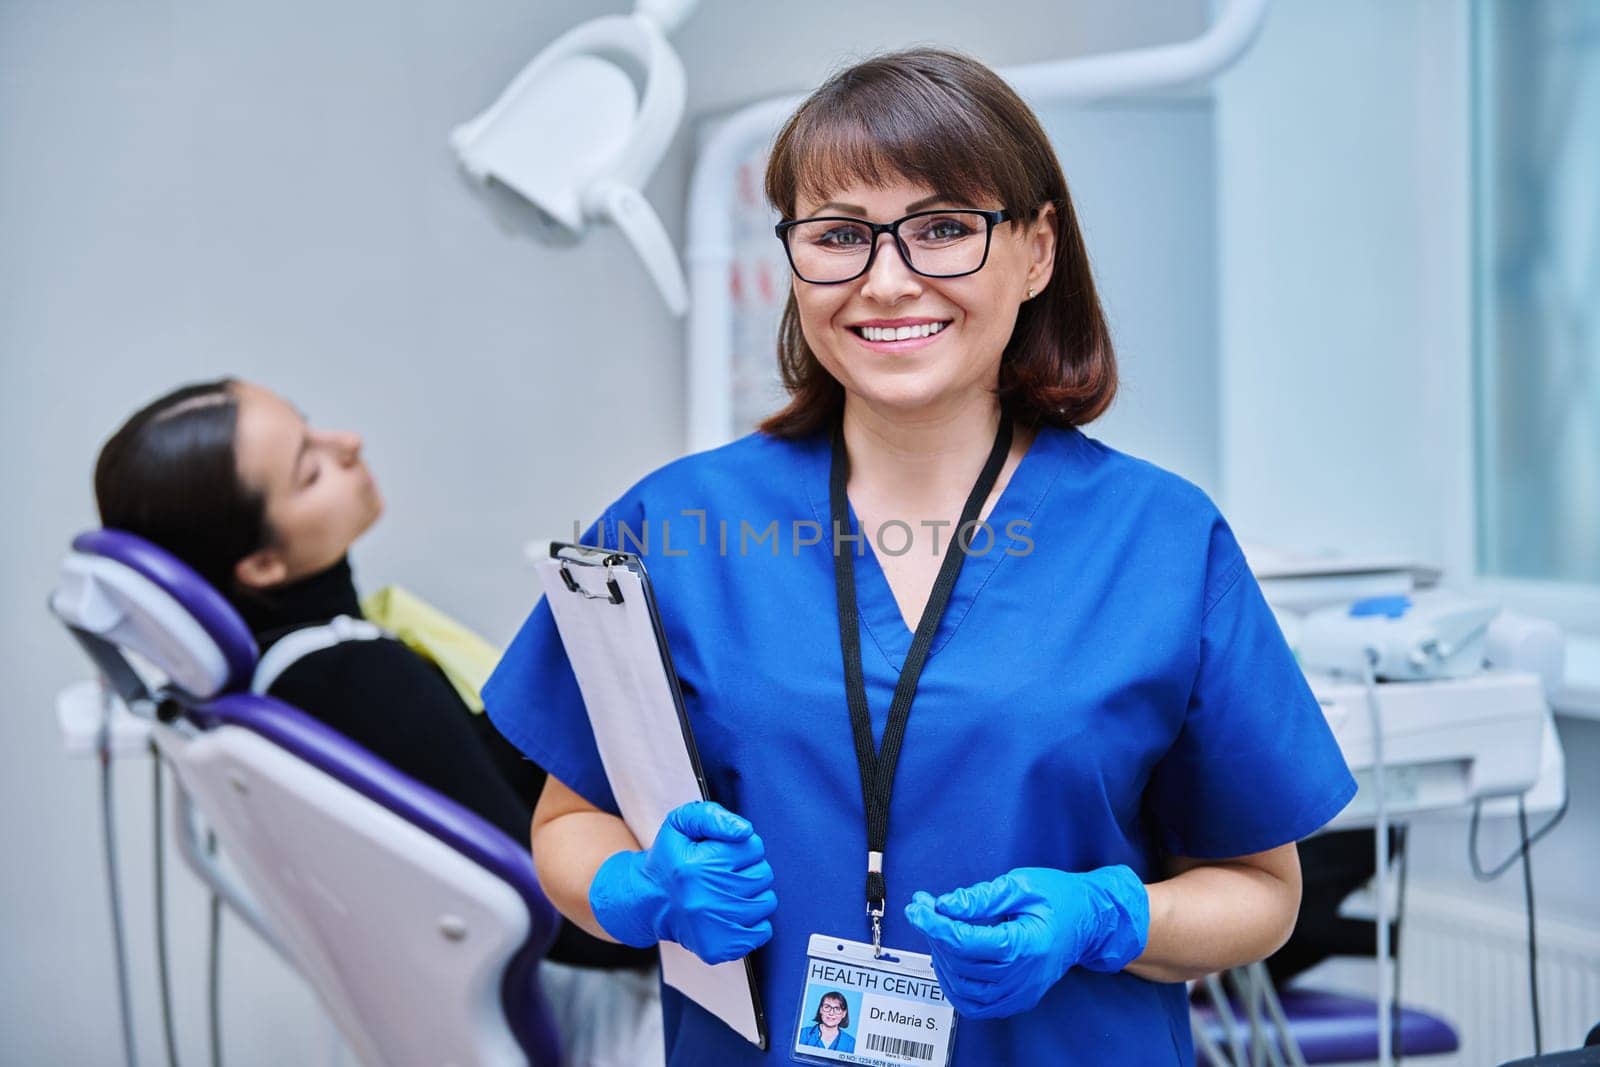 Portrait of smiling female dentist looking at camera with young girl patient sitting in dental chair. Visit to dentist examination treatment. Dentistry hygiene dental teeth health care concept